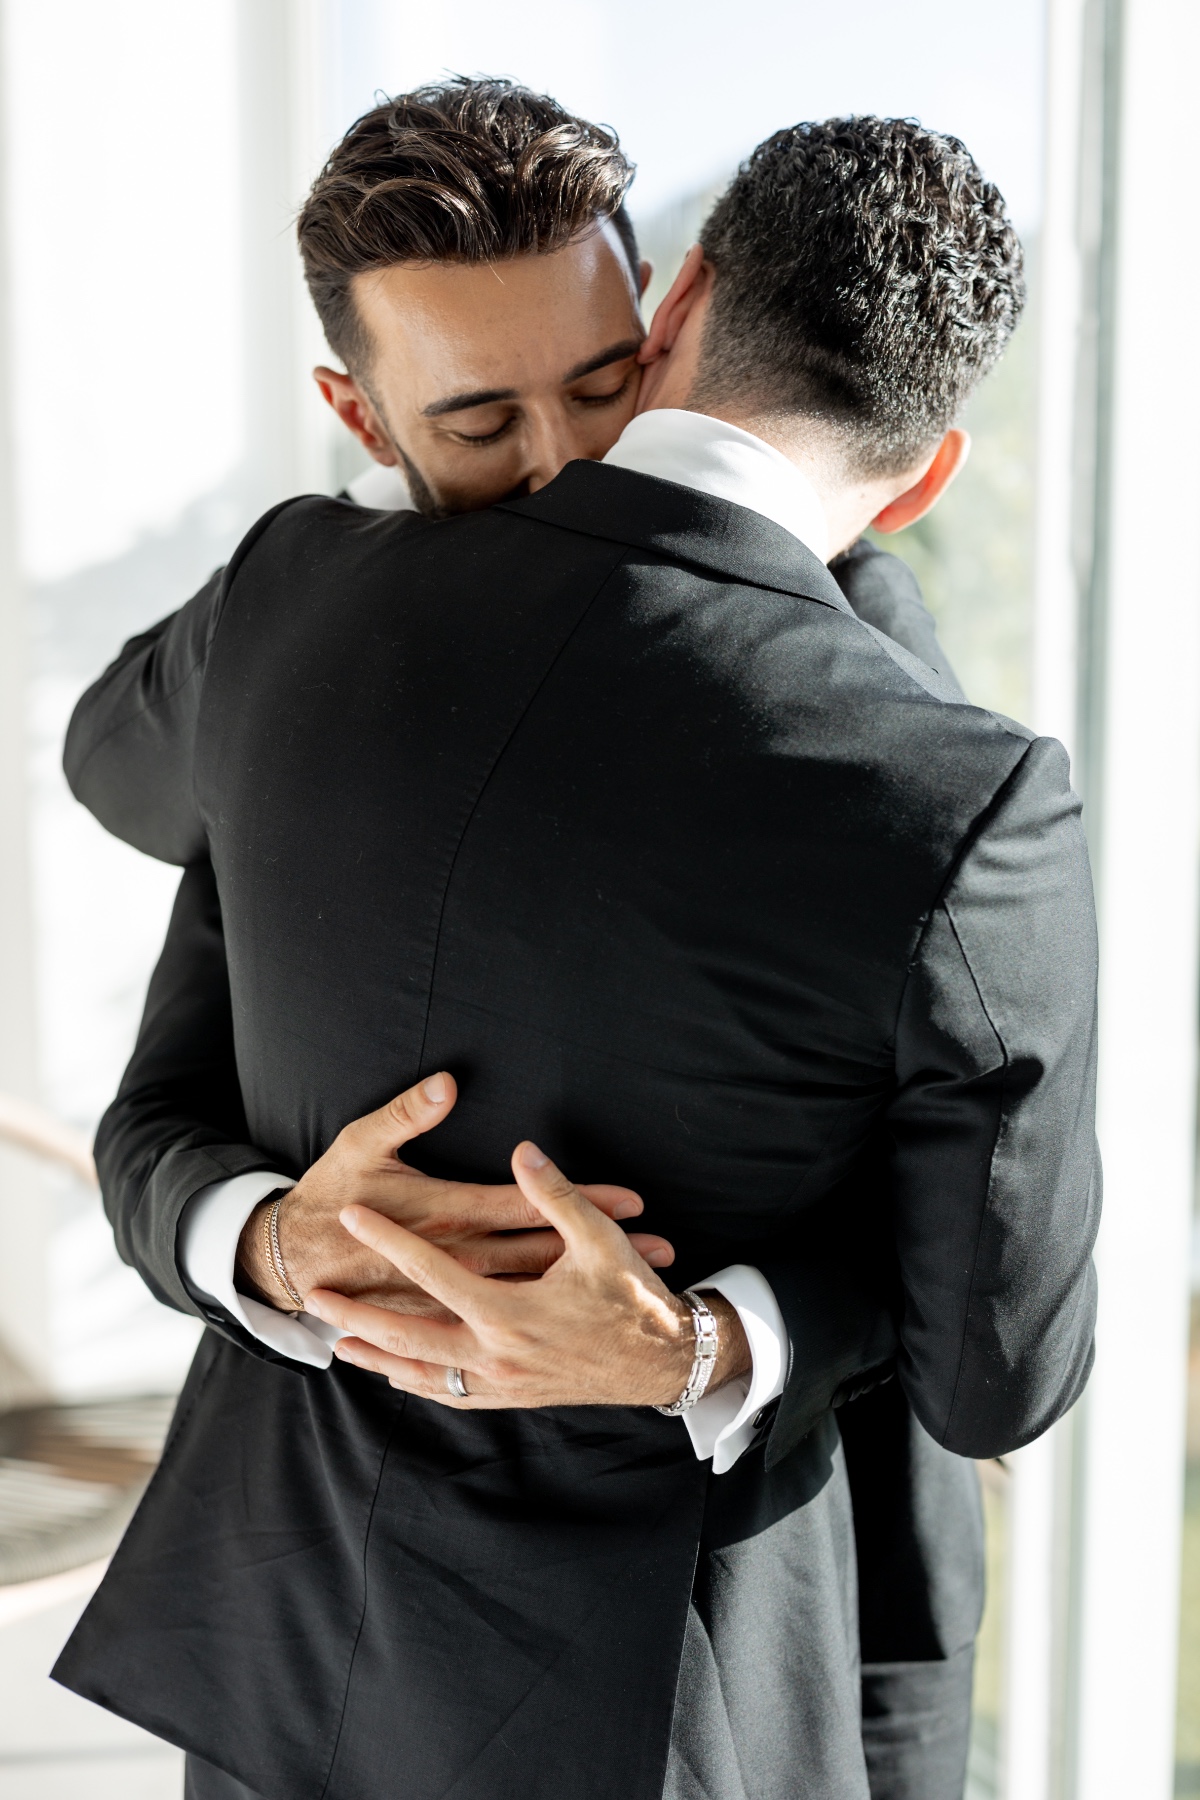 Two grooms embracing after destination wedding ceremony 